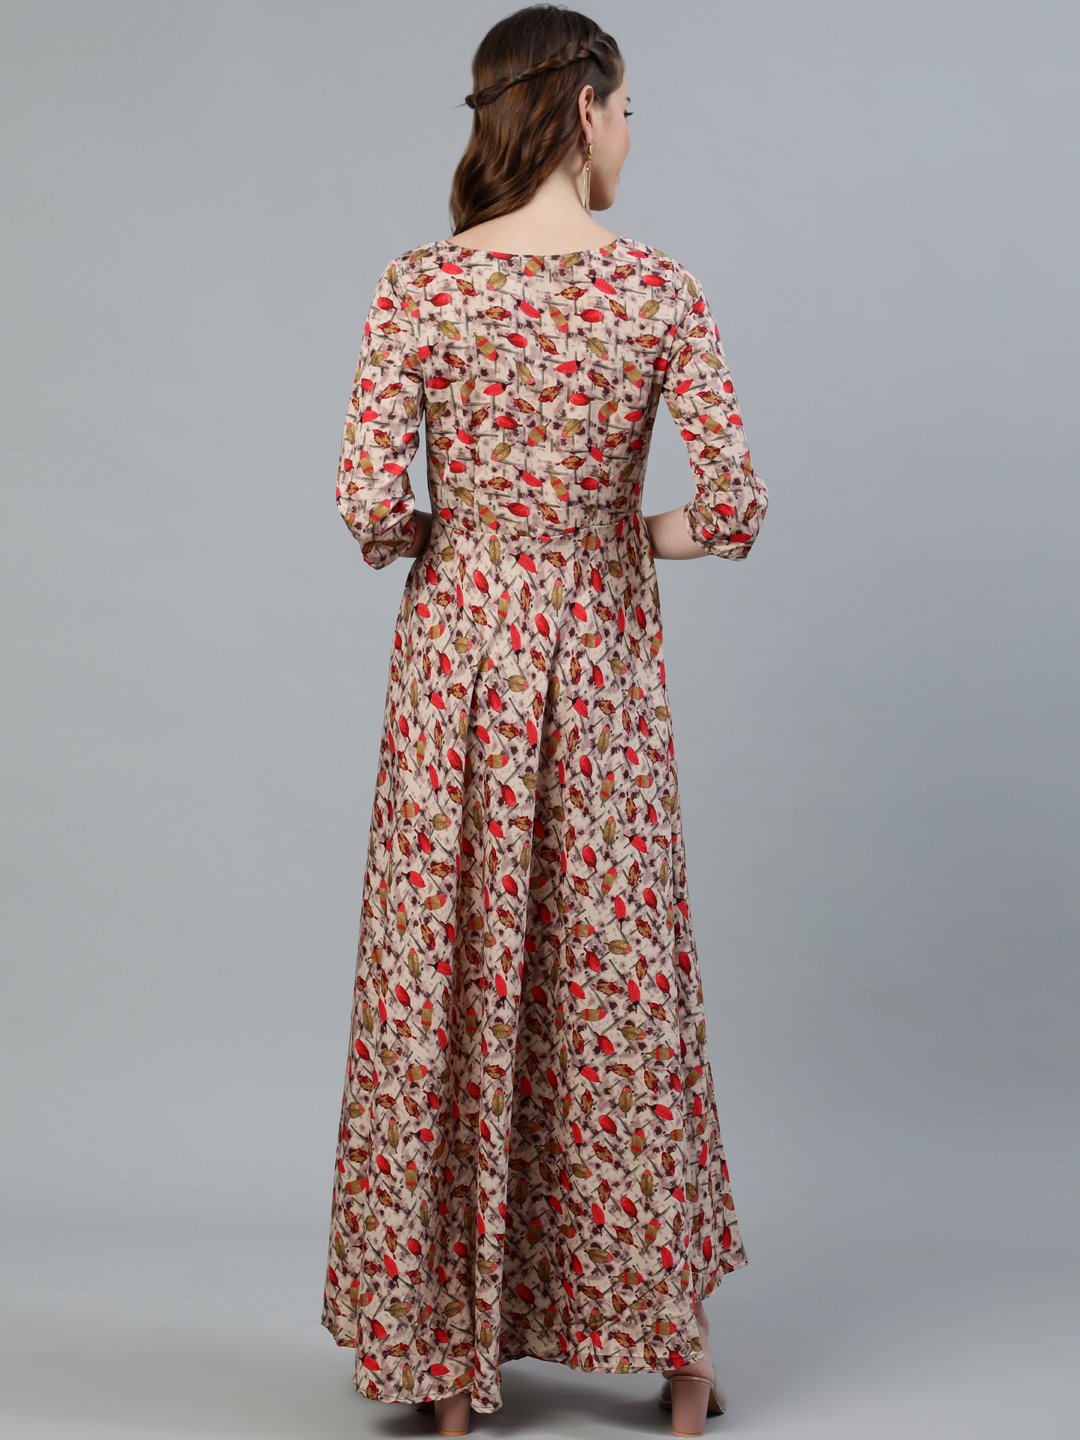 Women's Floral Printed Maxi Dress With Three Quarter Sleeves - Nayo Clothing